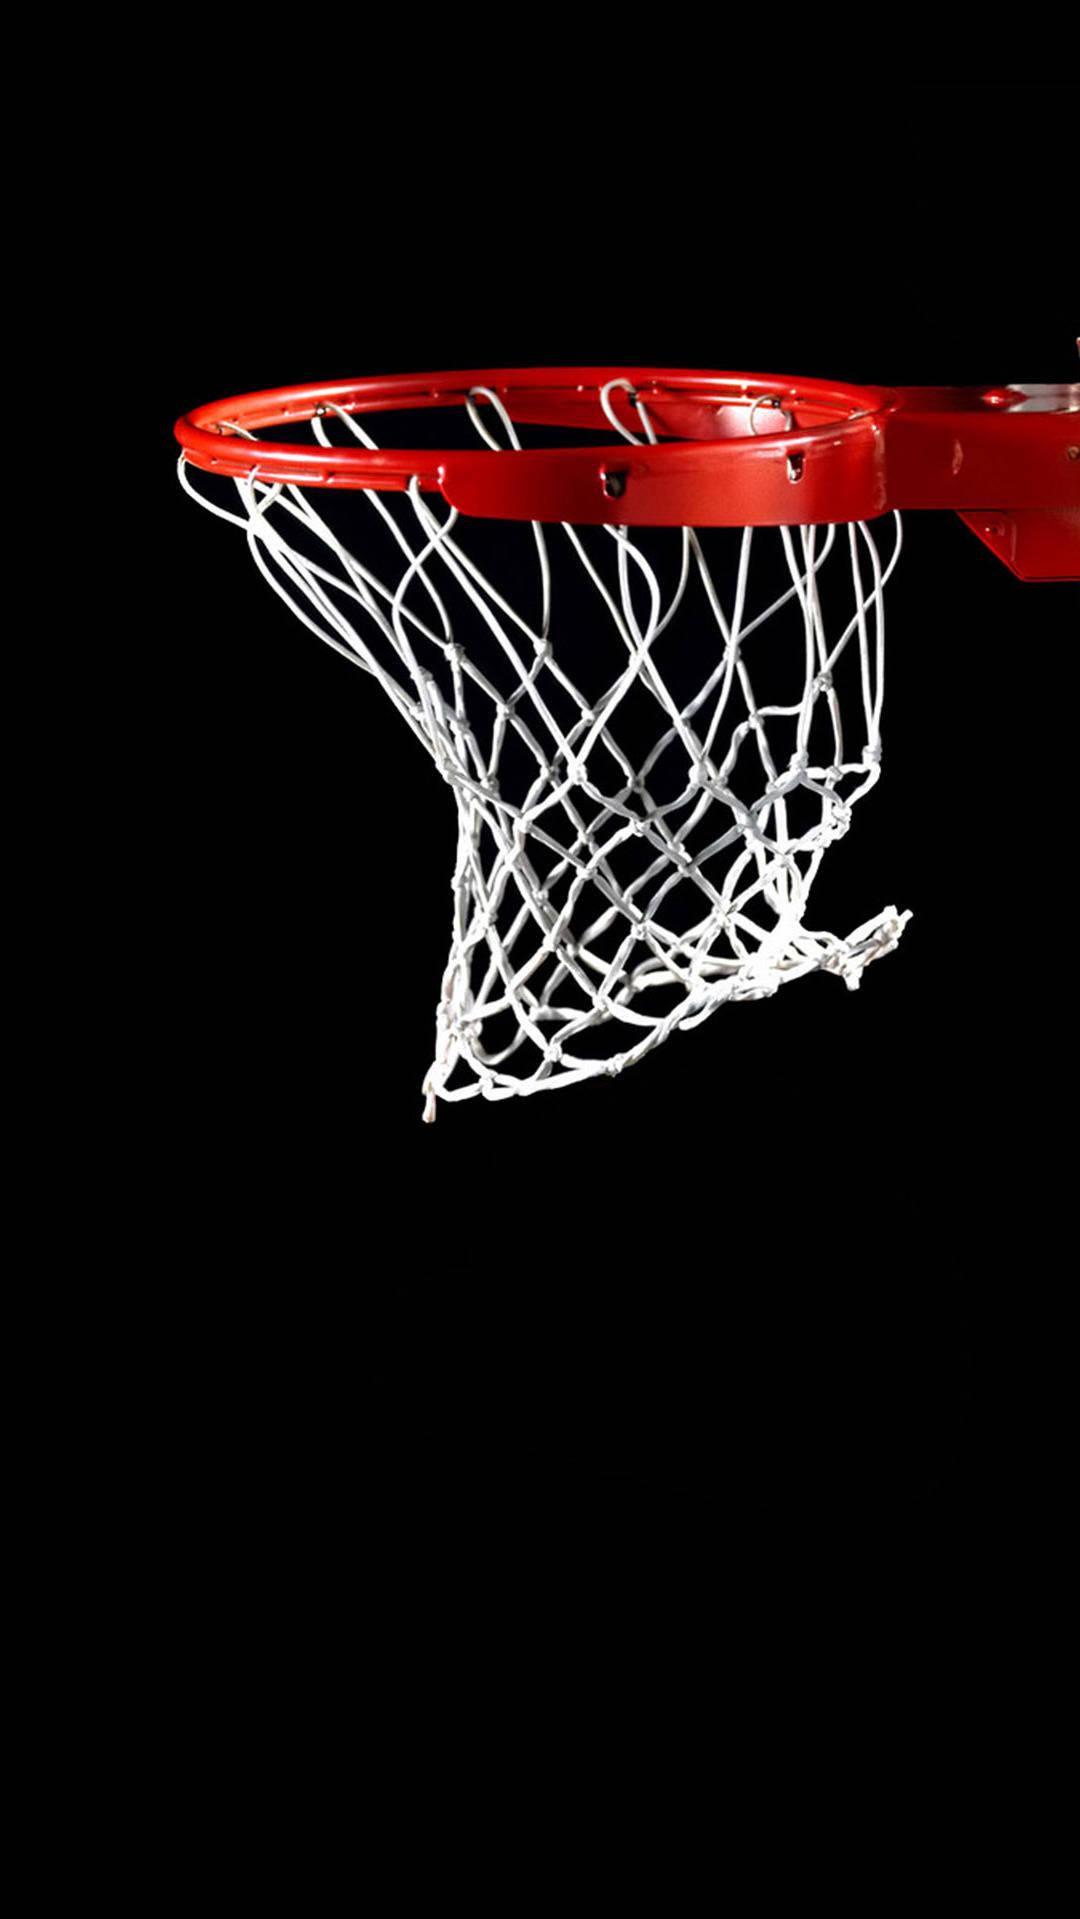 Simple Basketball Ring Cool iPhone Wallpaper